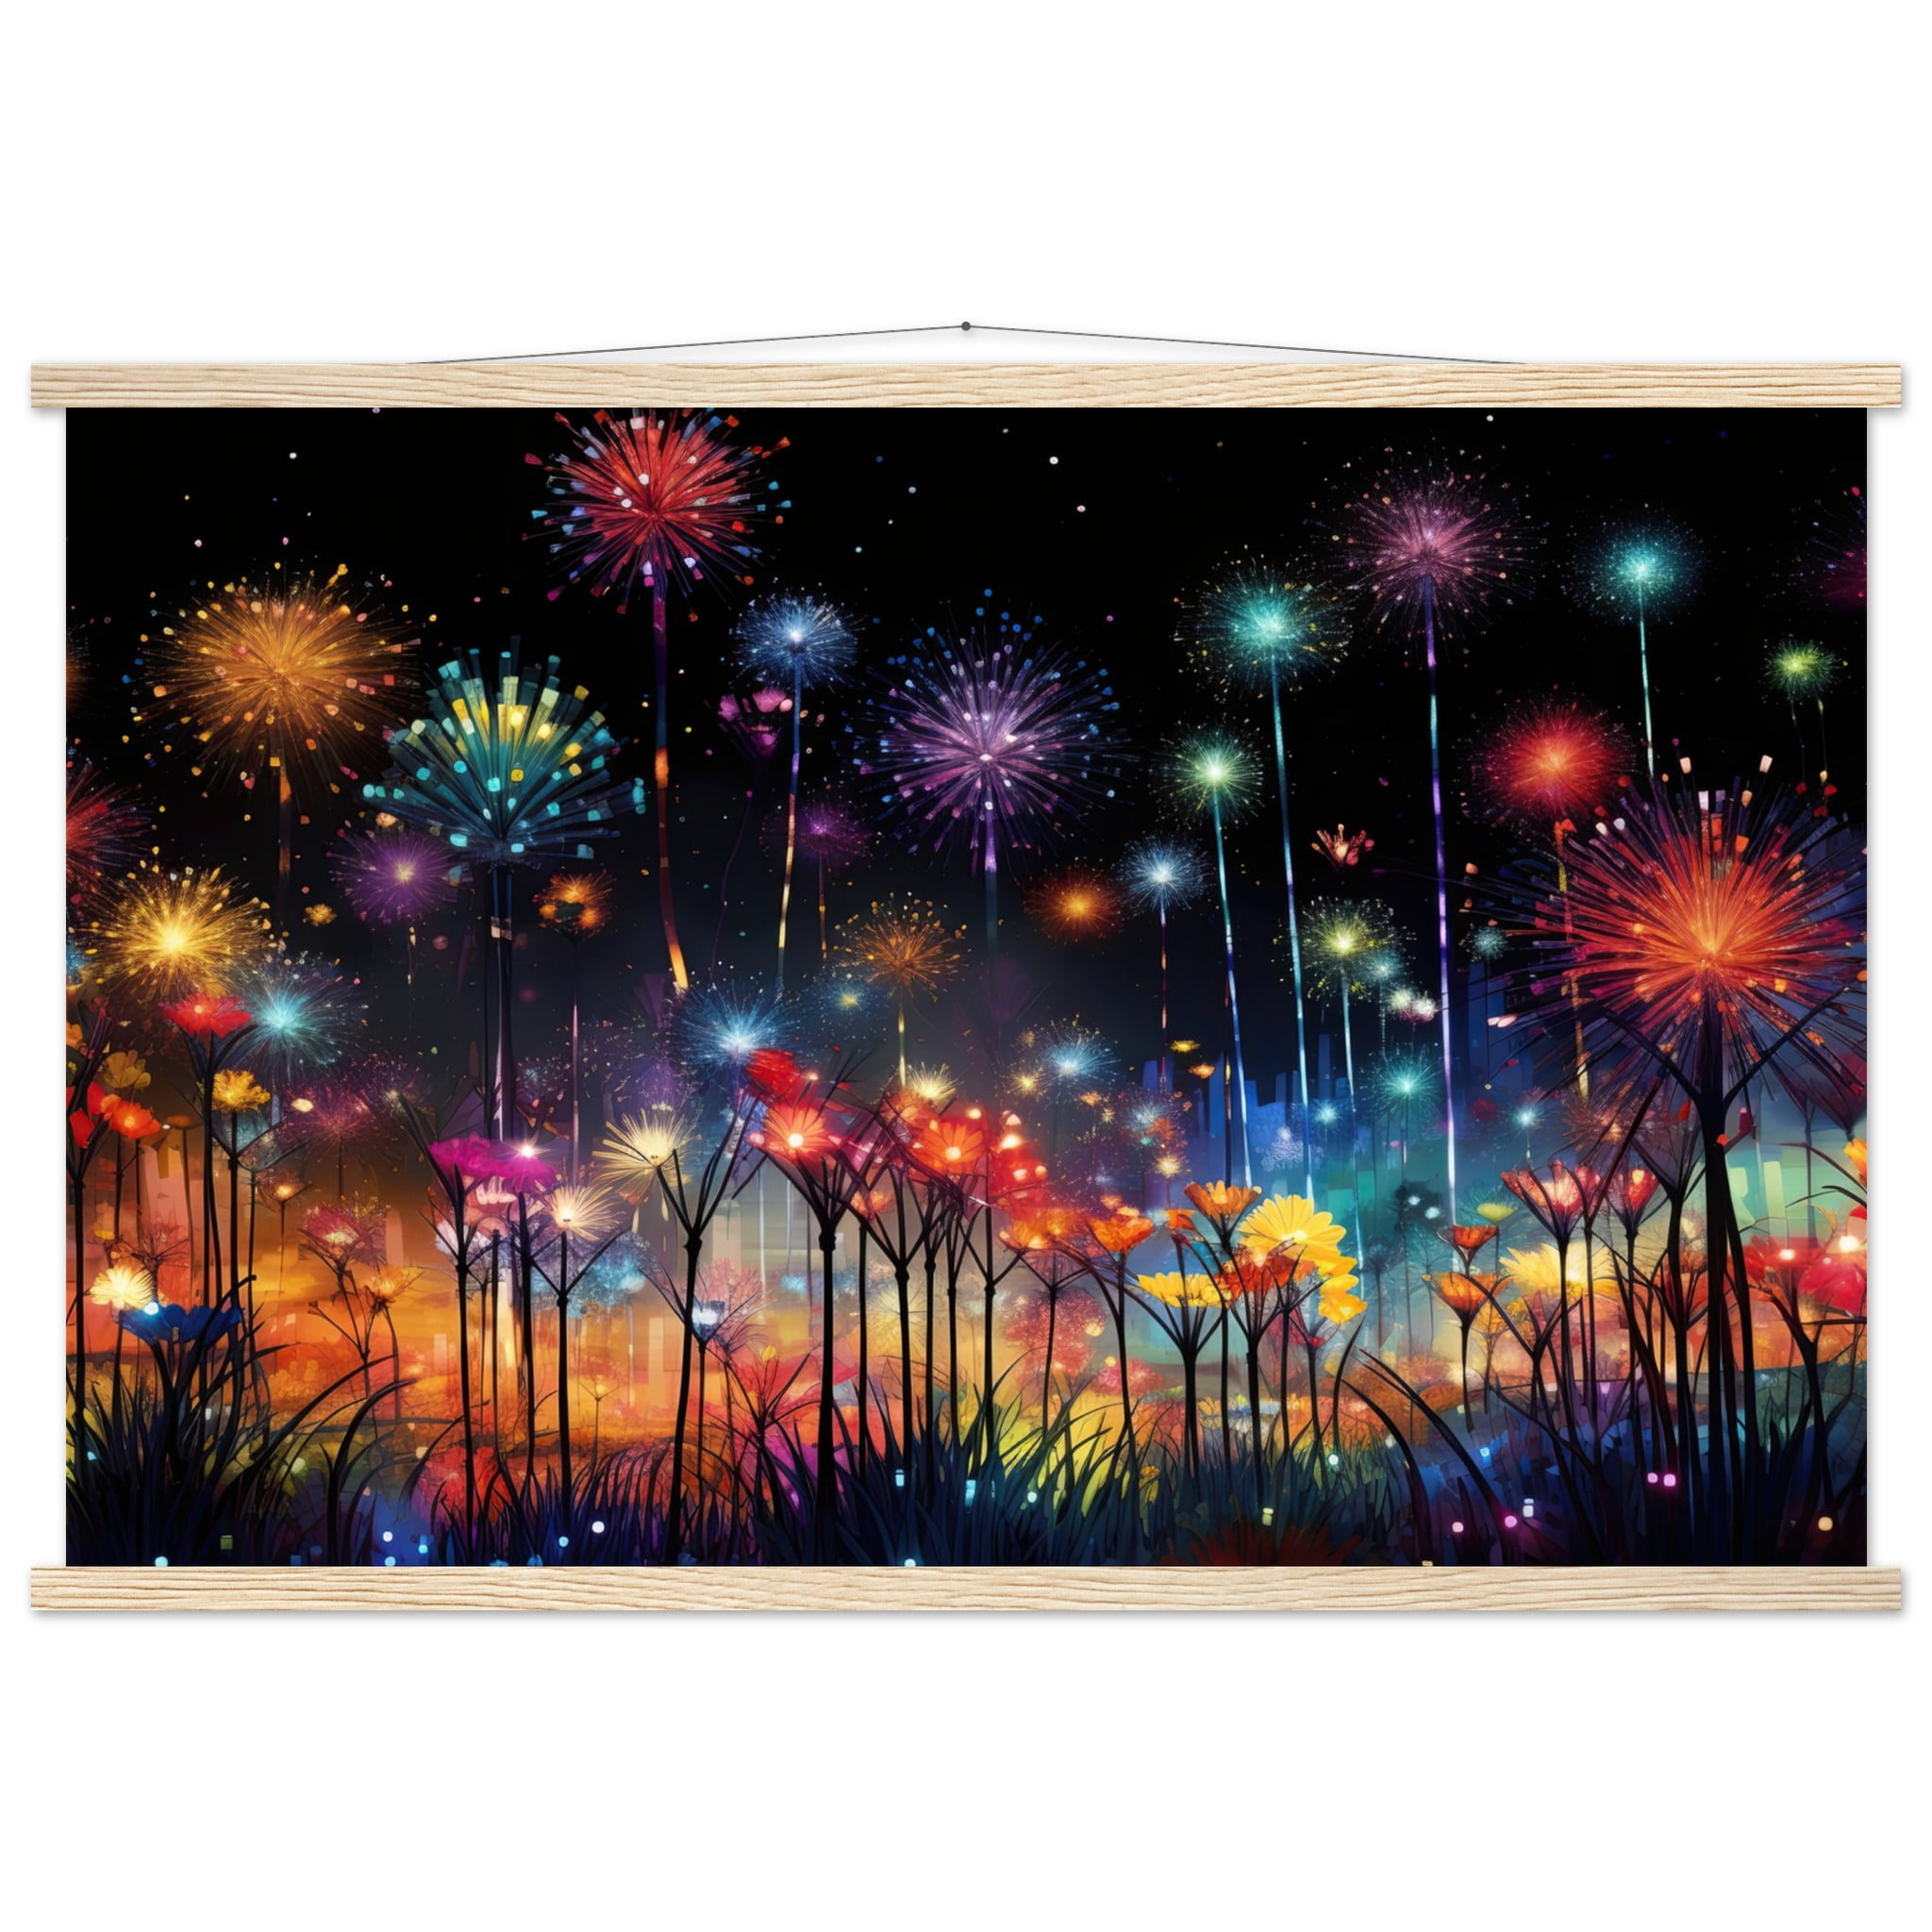 Fireworks and Flowers of Light and Color – Art Print with Hanger – 60×90 cm / 24×36″, Natural wood wall hanger